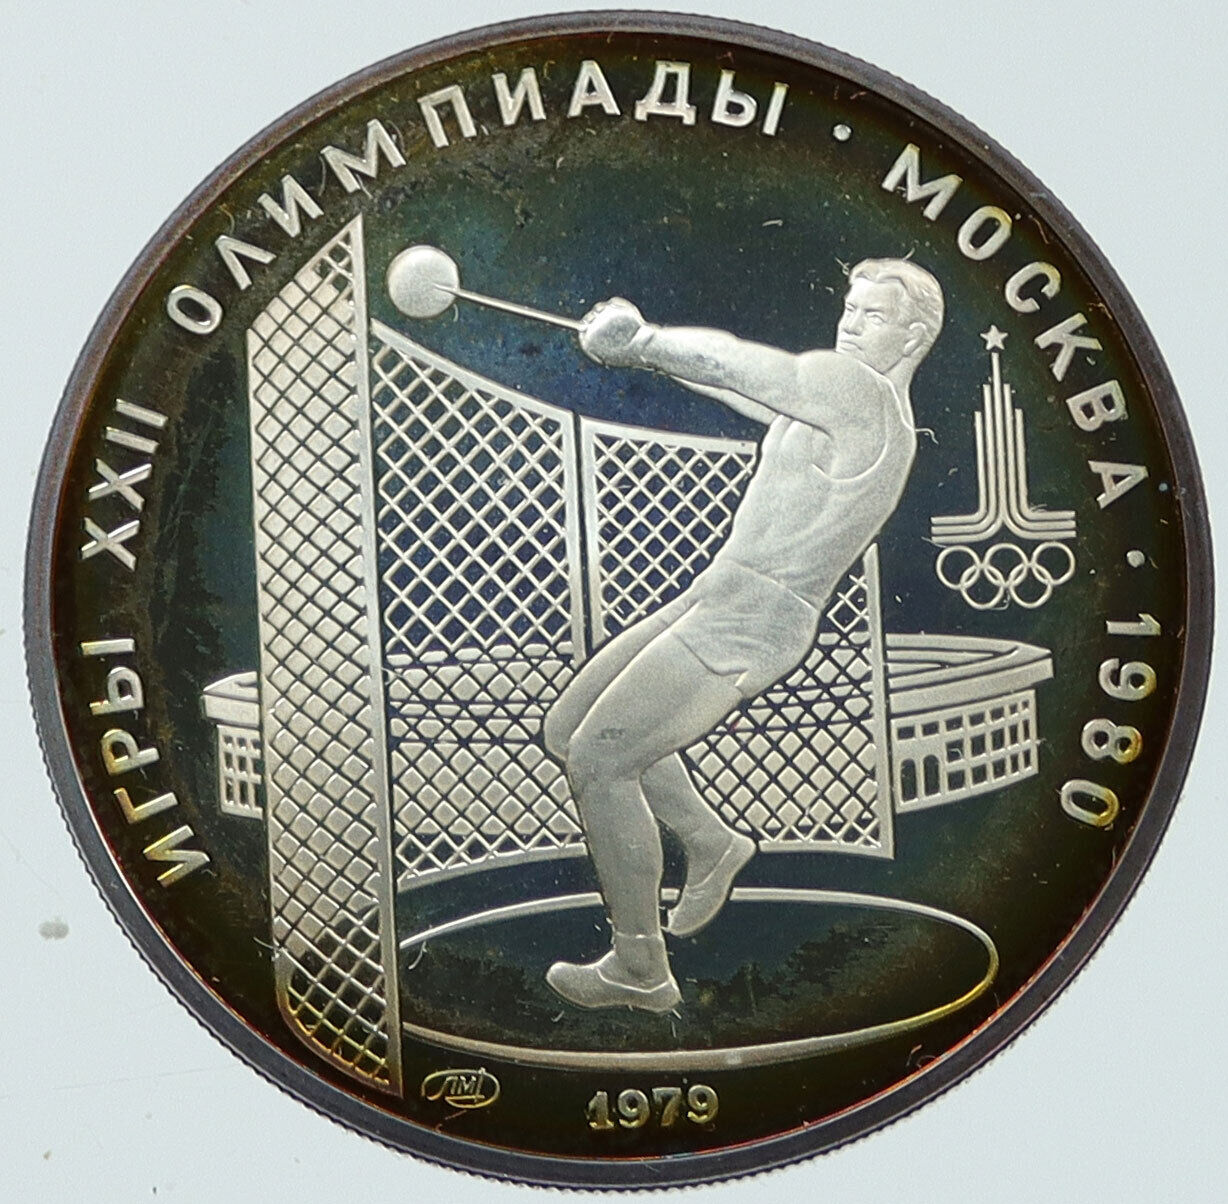 1979 MOSCOW 1980 Russia Olympics HAMMER THROW Proof Silver 5 Rouble Coin i116748